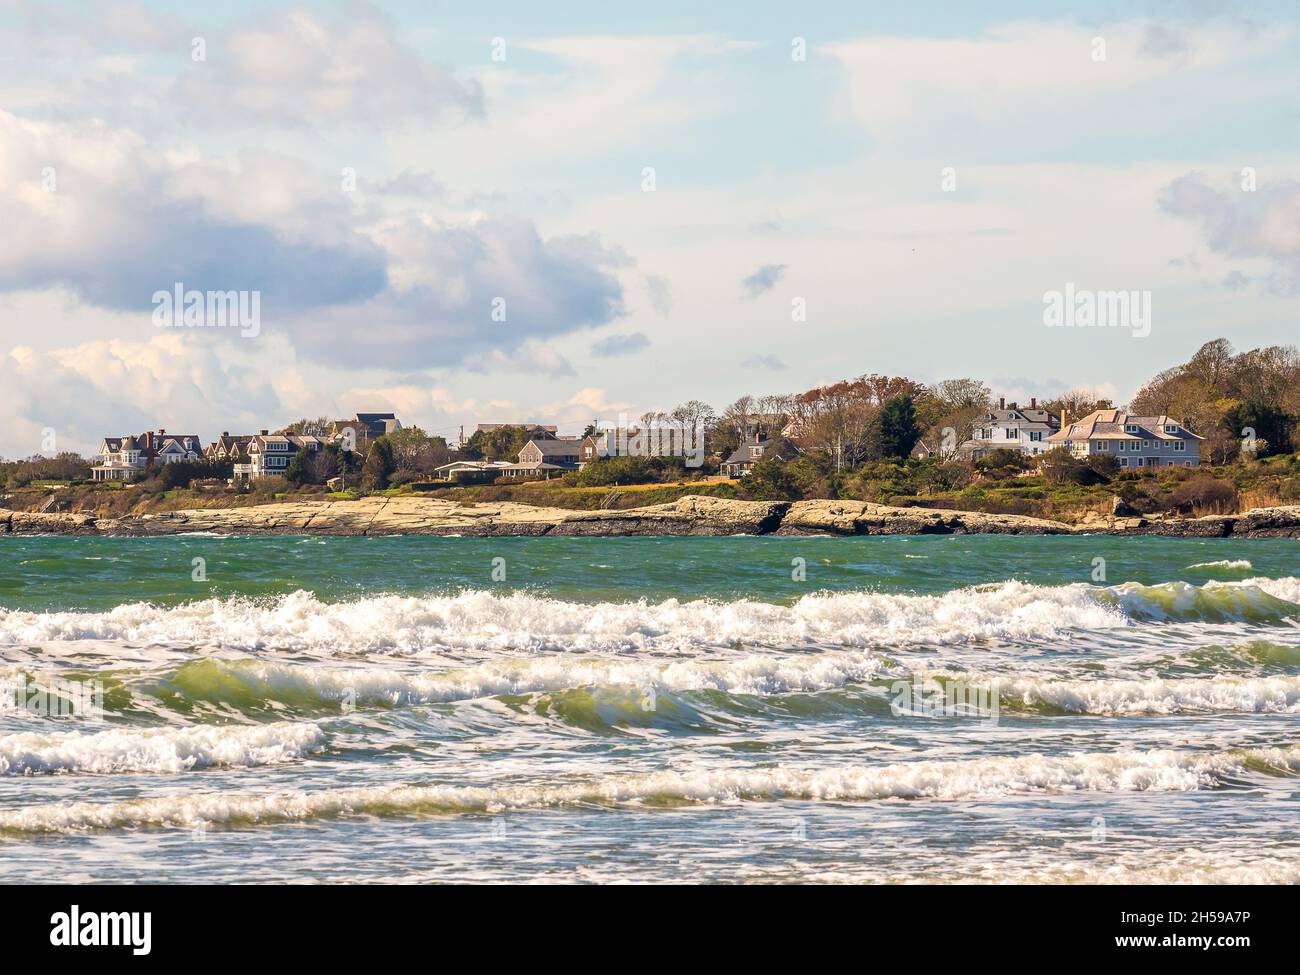 Scenic view of the seashore and residential area in Middleton, Rhode Island, from Second Beach Park Stock Photo